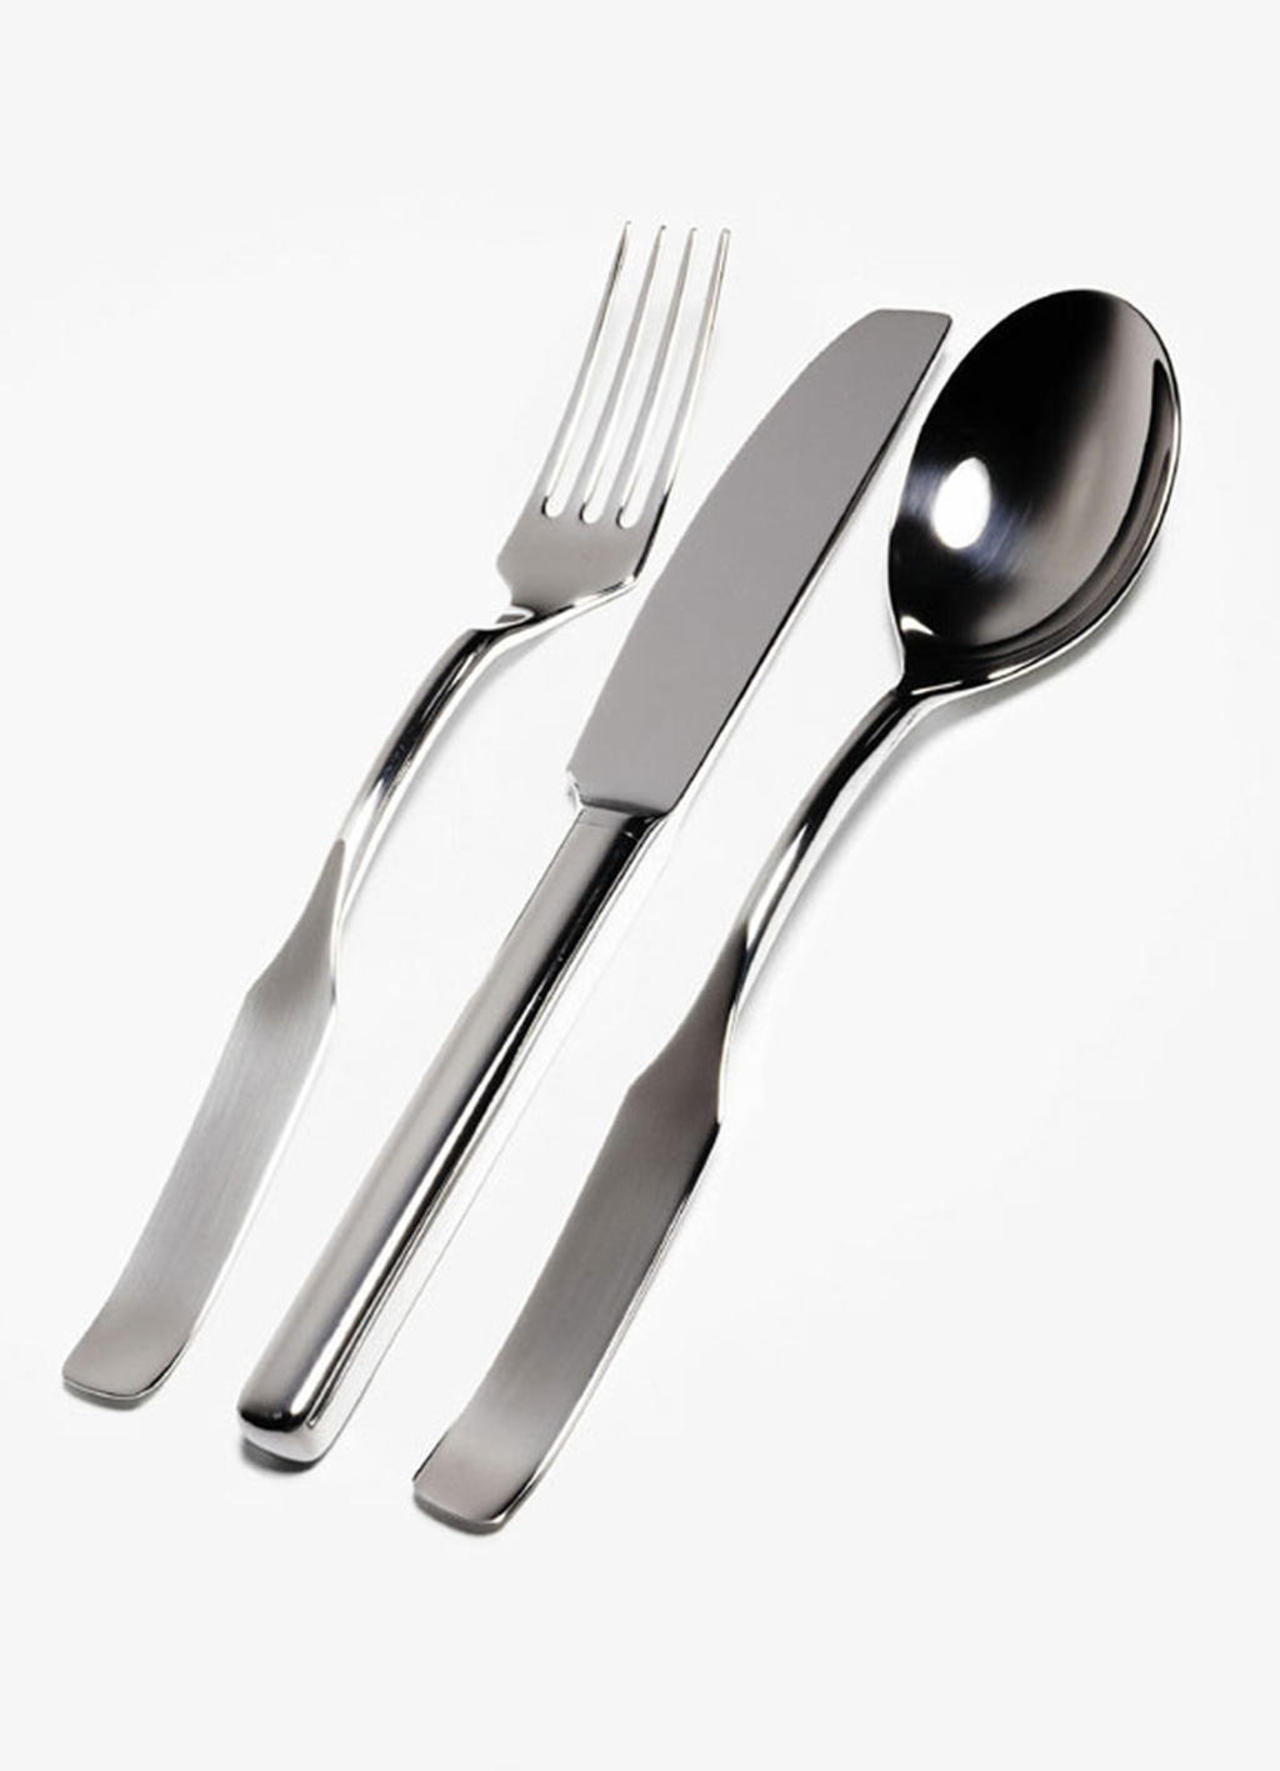 Alessi RS01 cutlery set by Richard Sapper